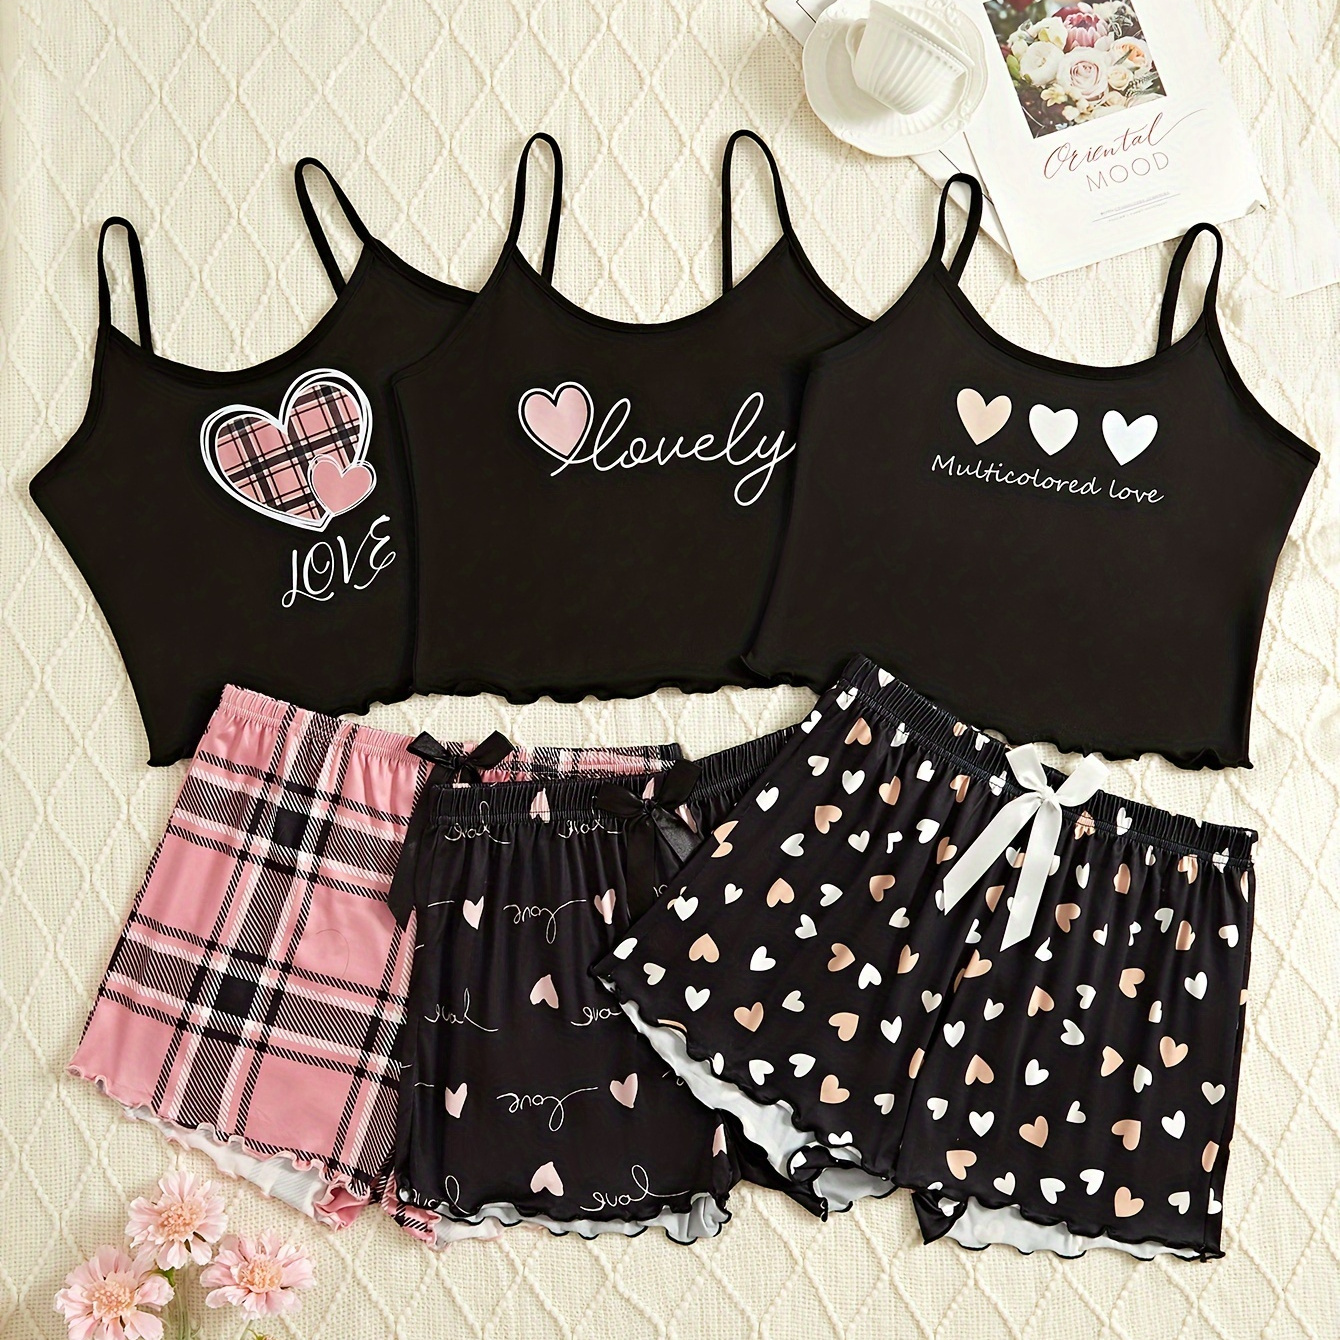 

3 Sets Casual Heart & Letter Print Frill Trim Pajama Set, Round Neck Backless Cami Top & Elastic Shorts, Women's Sleepwear